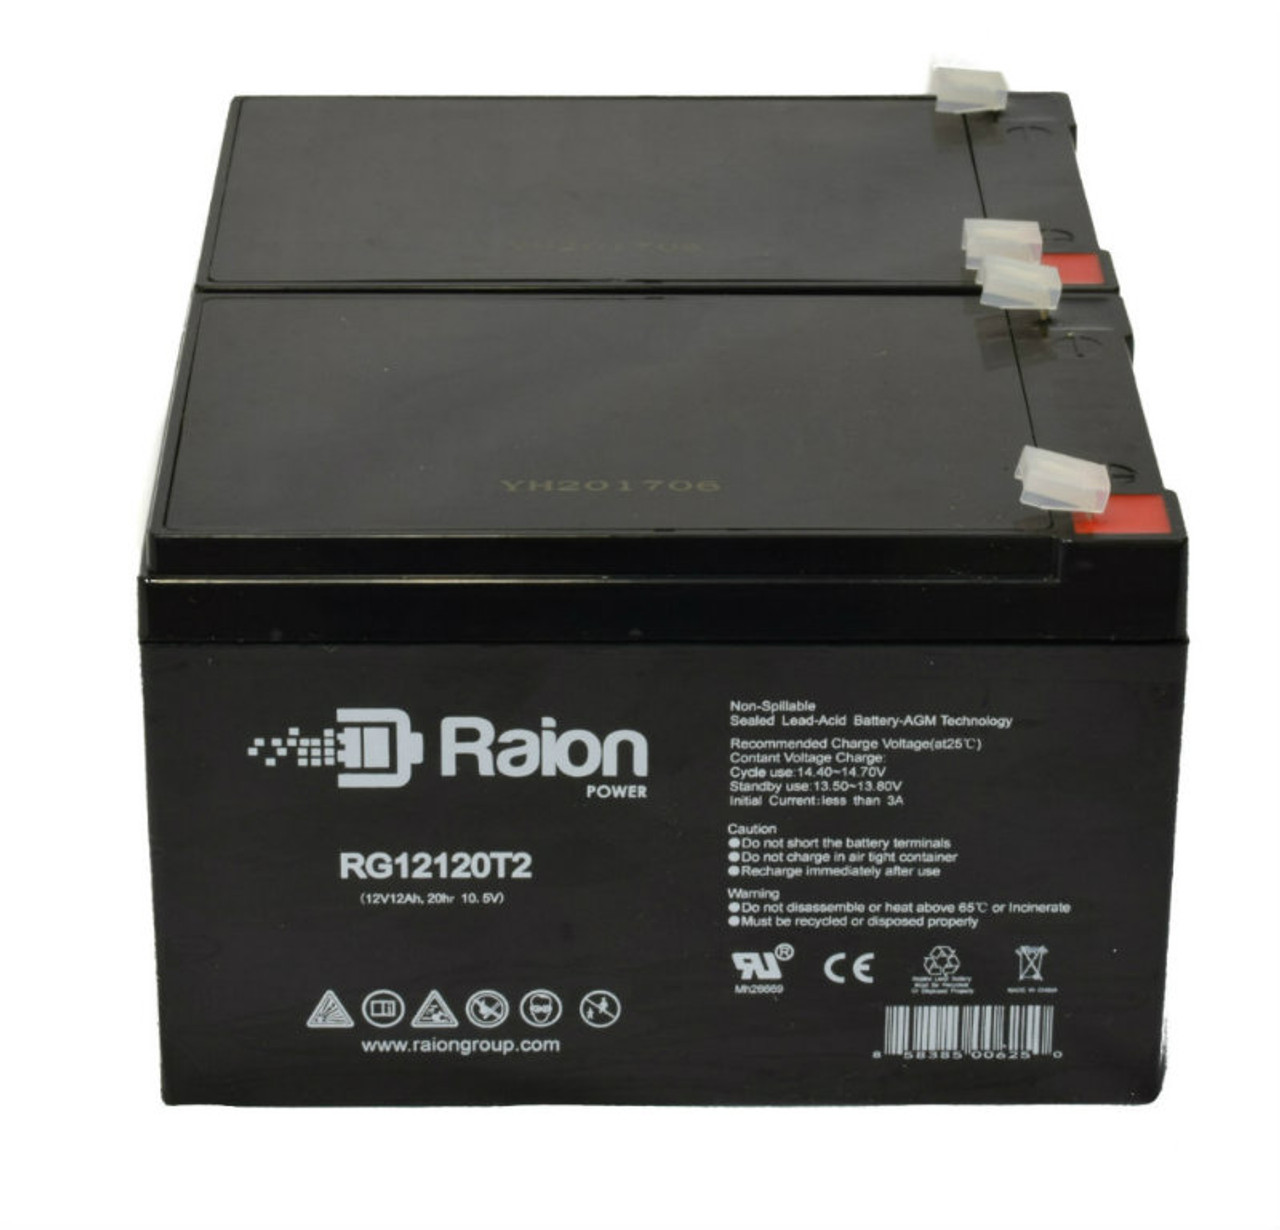 Raion Power 12V 12Ah Non-Spillable Compatible Replacement Battery for Neptune NT12-12 F2 - (2 Pack)